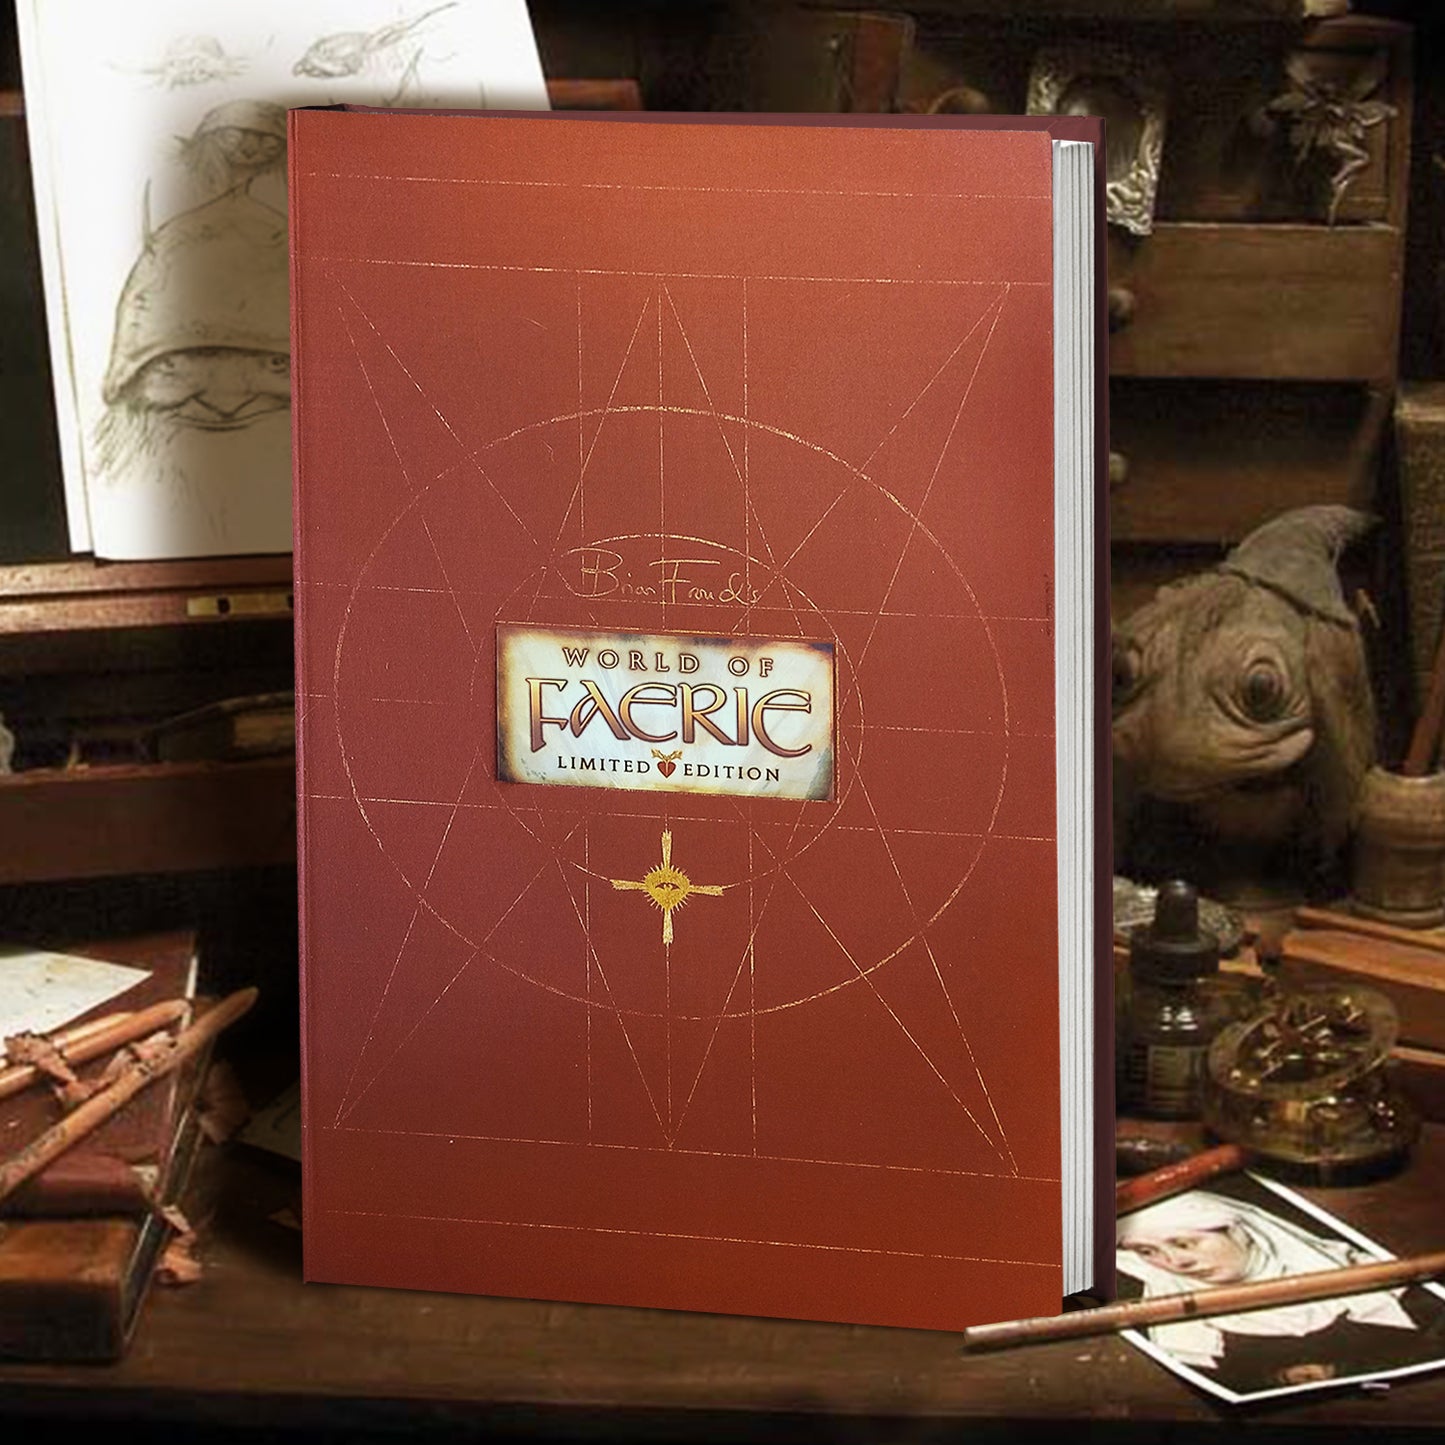 A brown hardcover book on a desk. At the center of the cover is a parchment-colored rectable with yellow text saying Brian Froud's World of Faeire, limited edition." Behind the book are old fashioned art tools, strwn about in small wooden drawers. A few drawings are scattered around the desk.